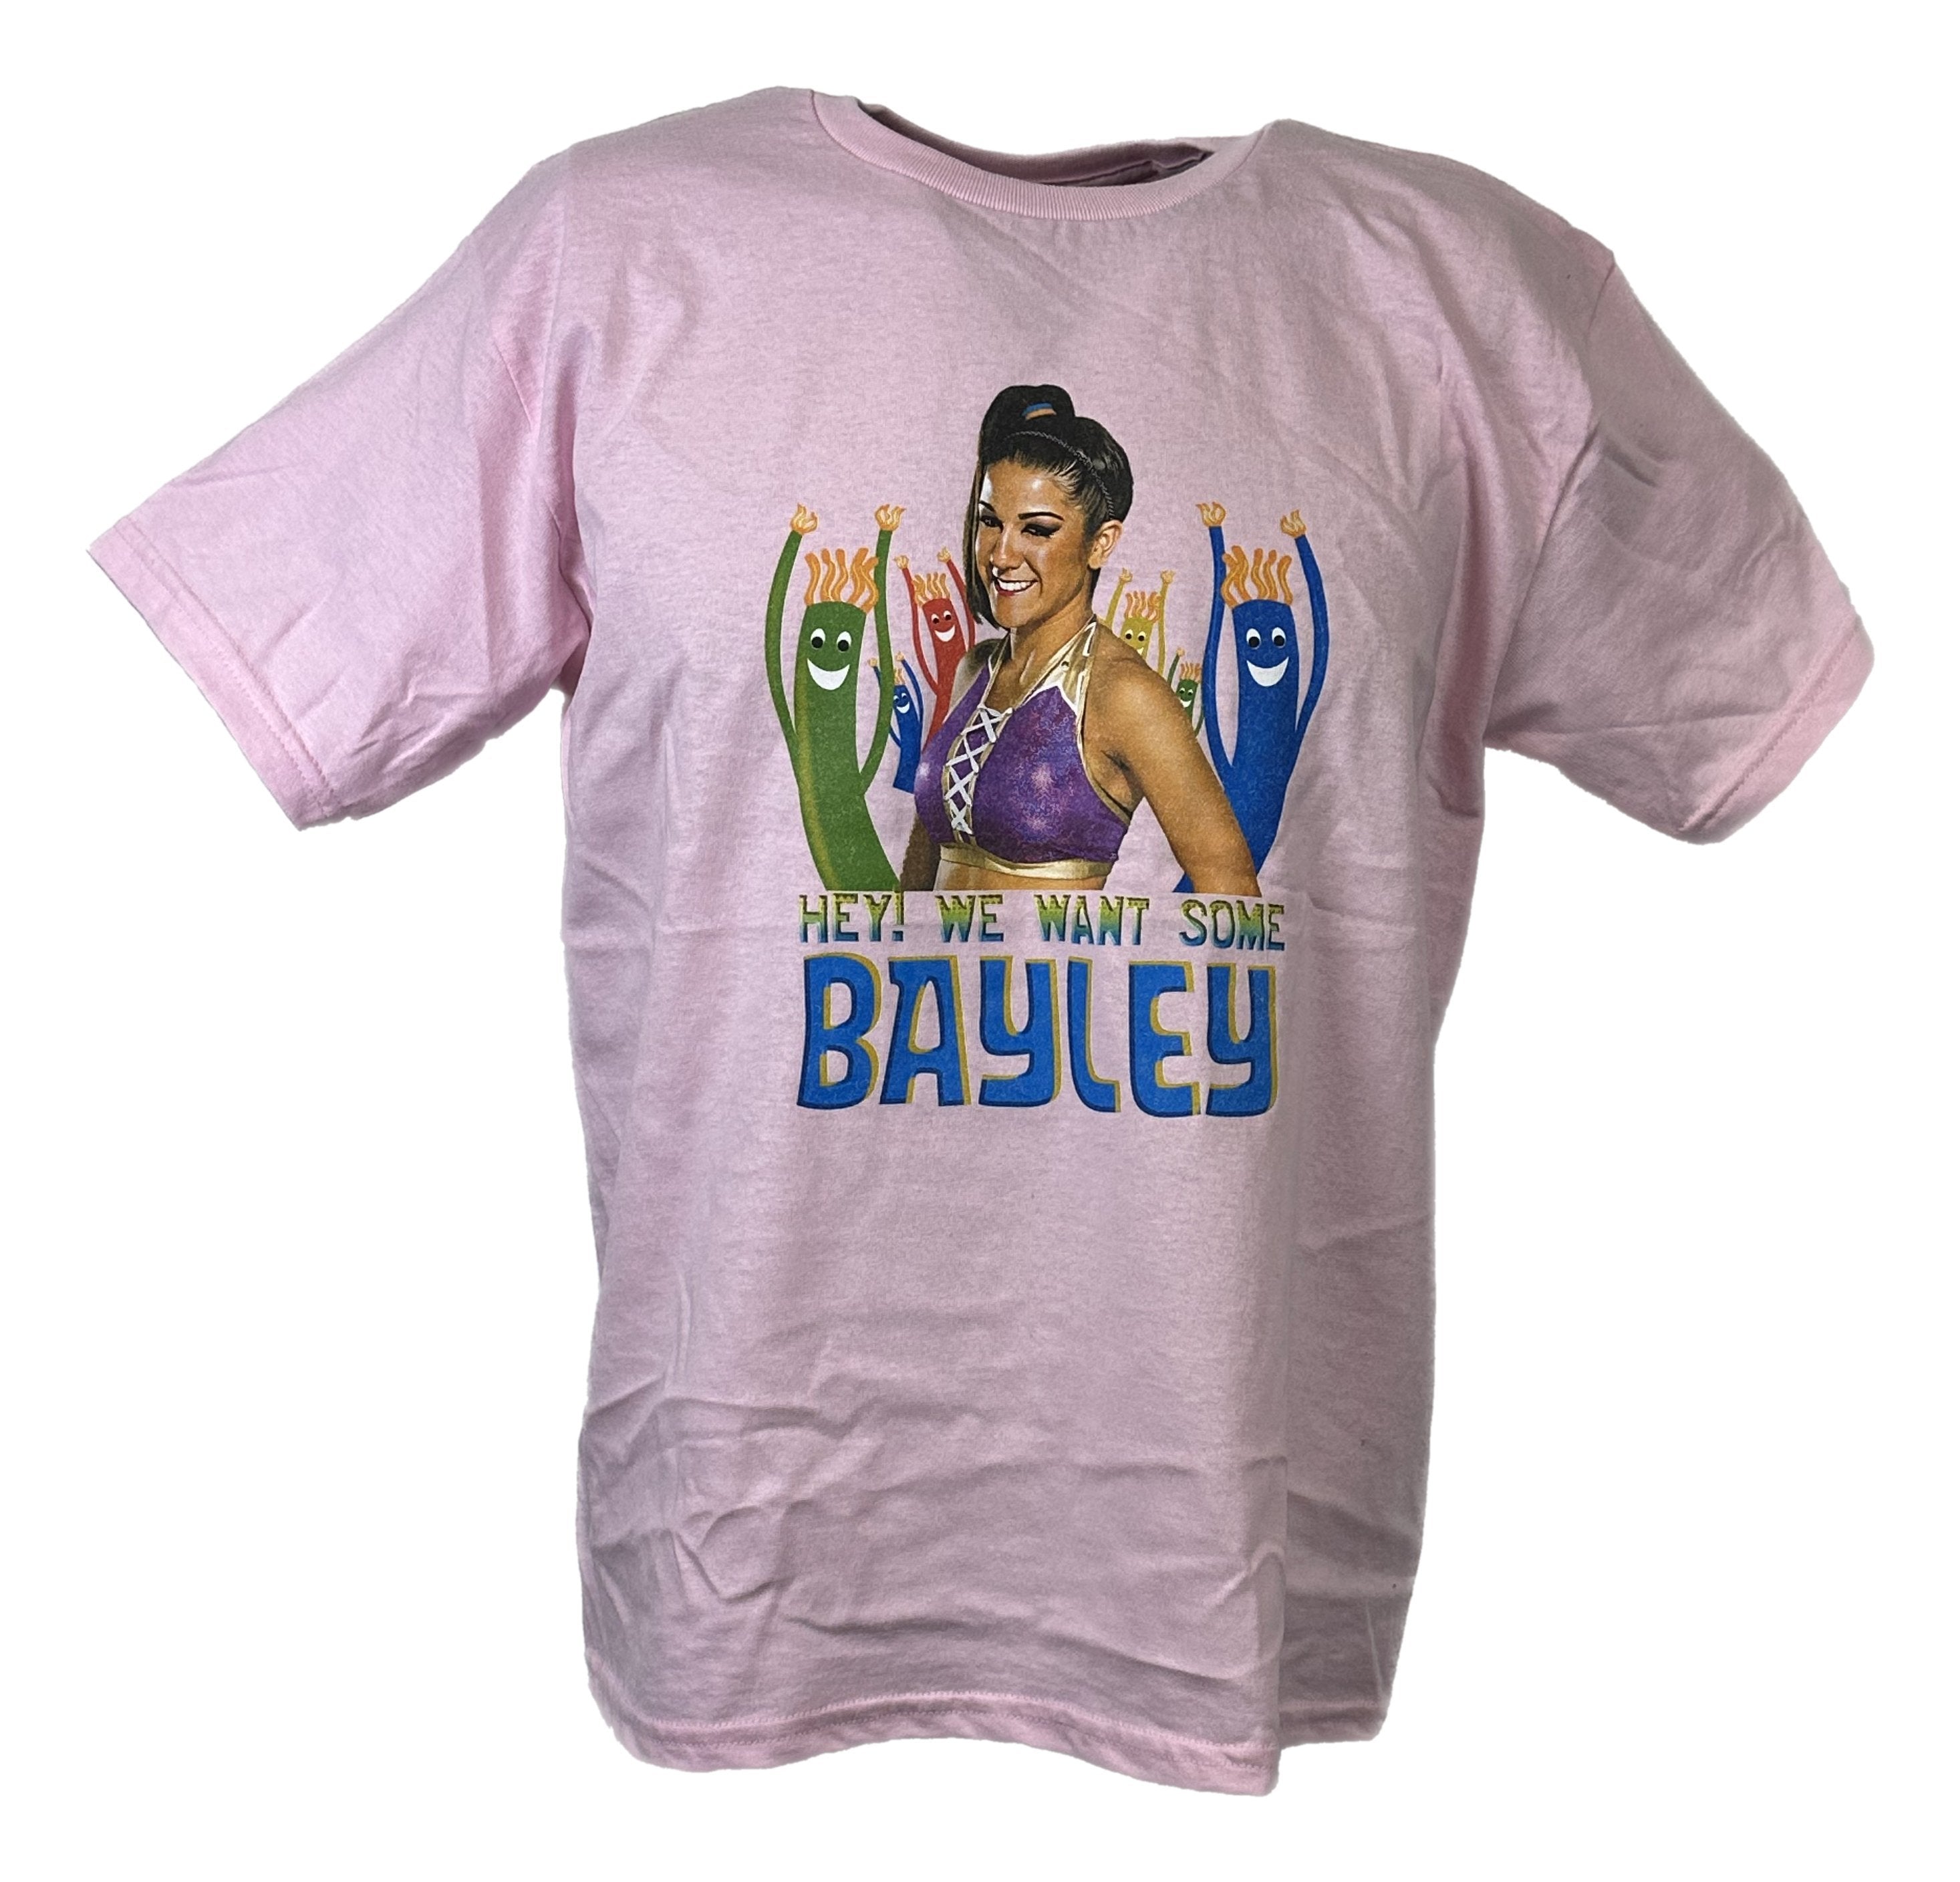 hey! we want some bayley superstar youth kids light pink t shirt 4105 hddy5